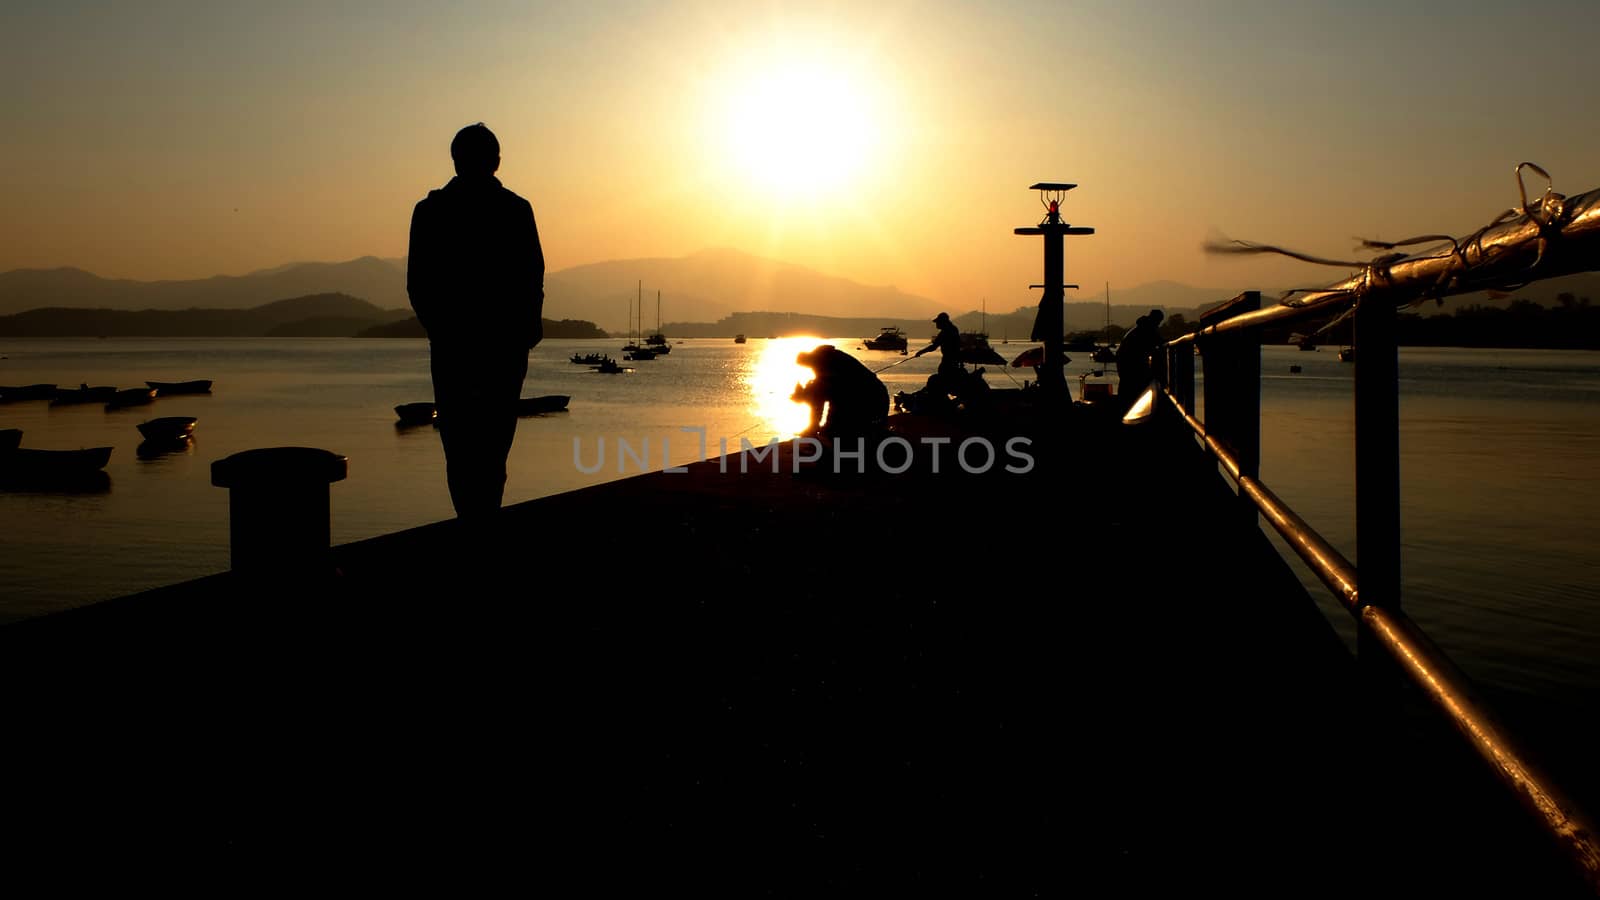 Shadow of the small pier and man at sunset